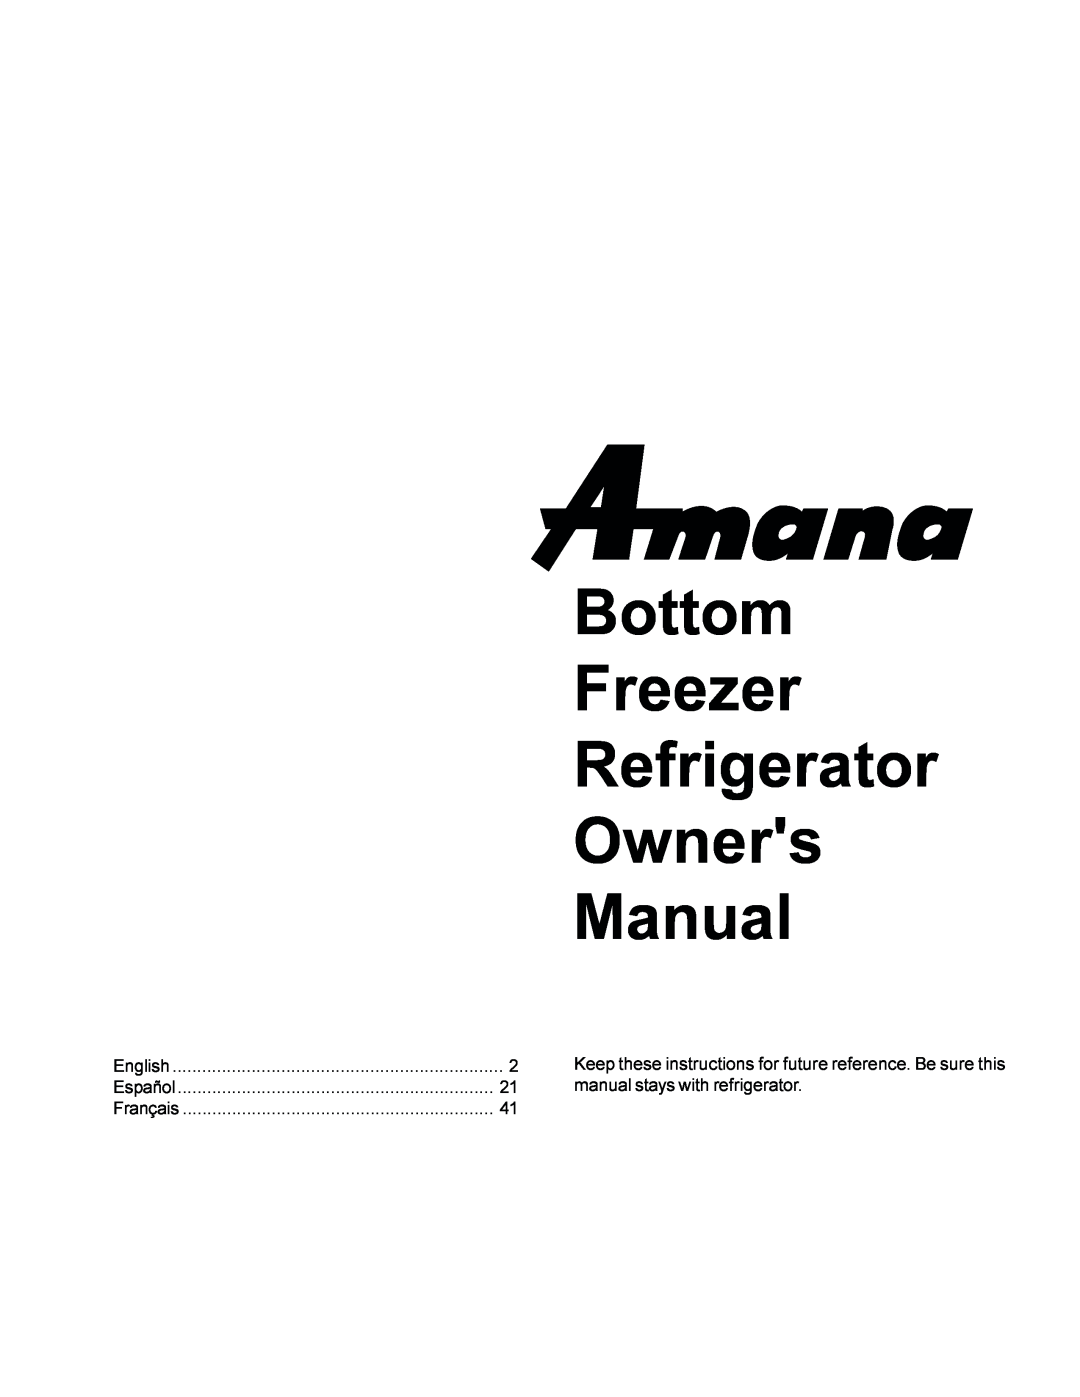 Amana IA 52204-0001 owner manual manual stays with refrigerator 